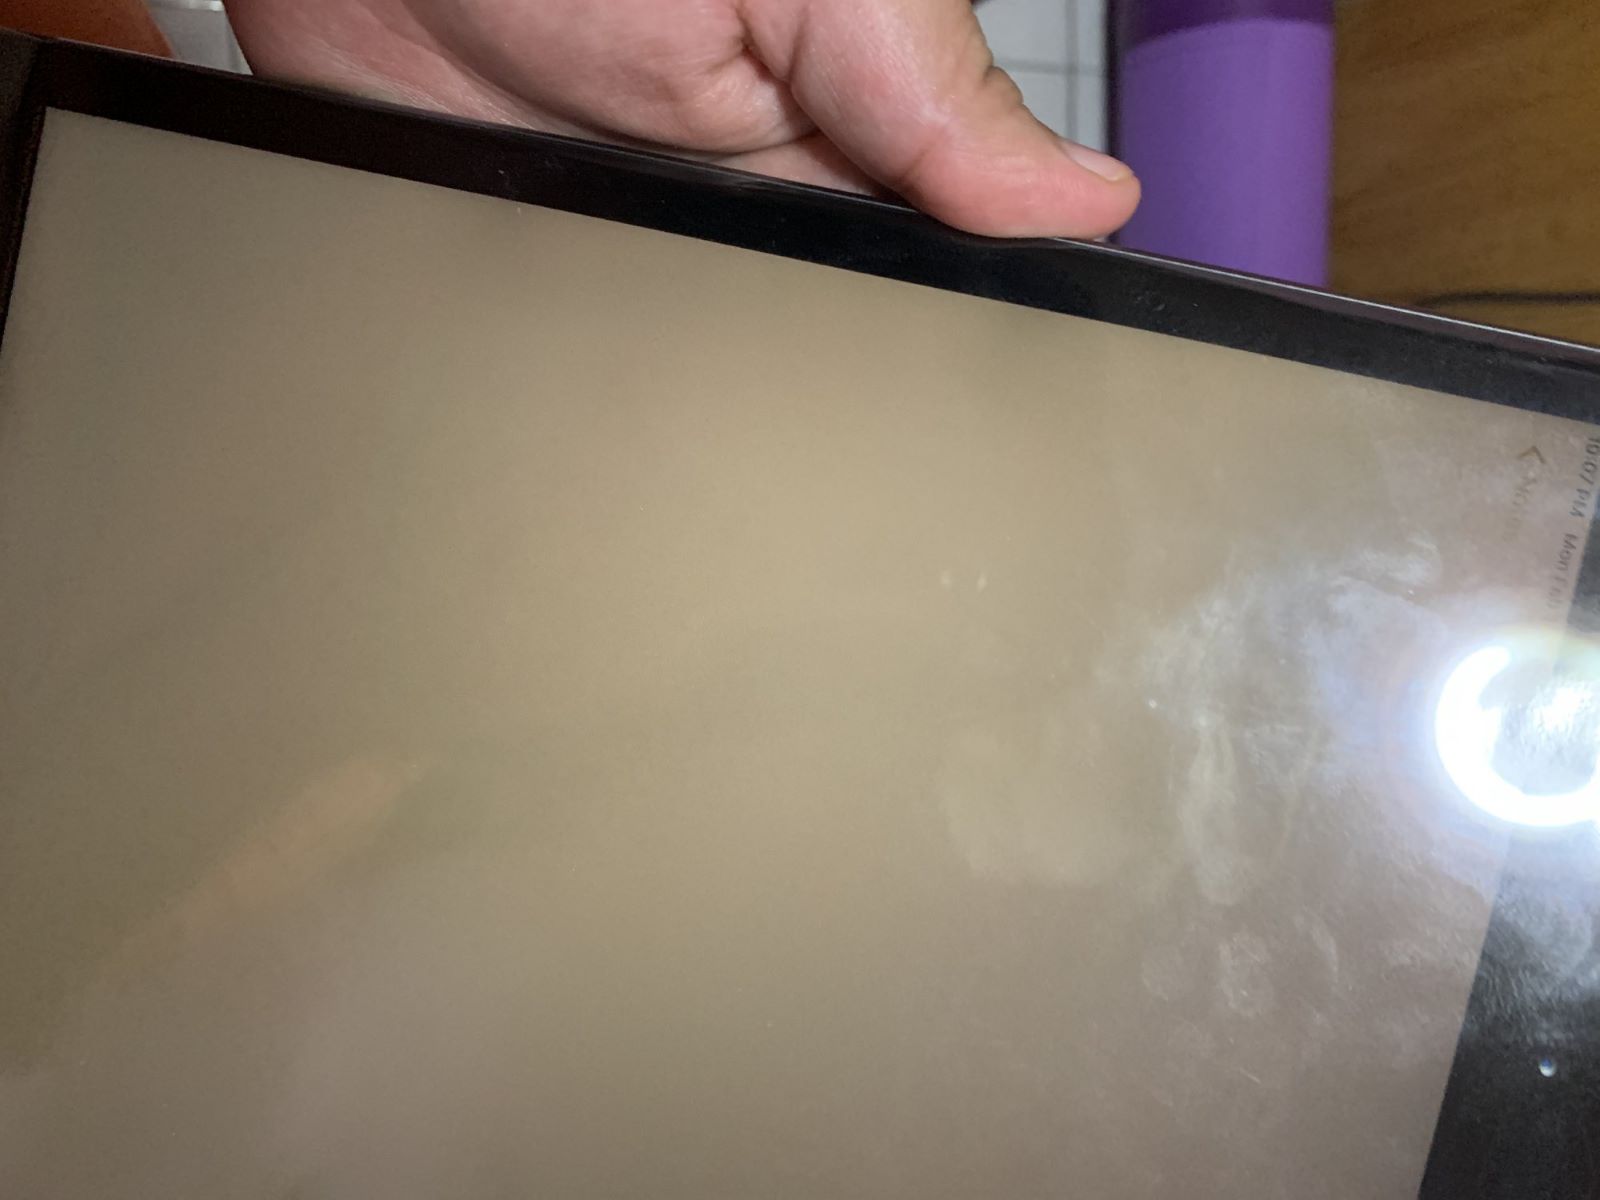 IPad Screen Went Dark: Here's What You Need To Do!